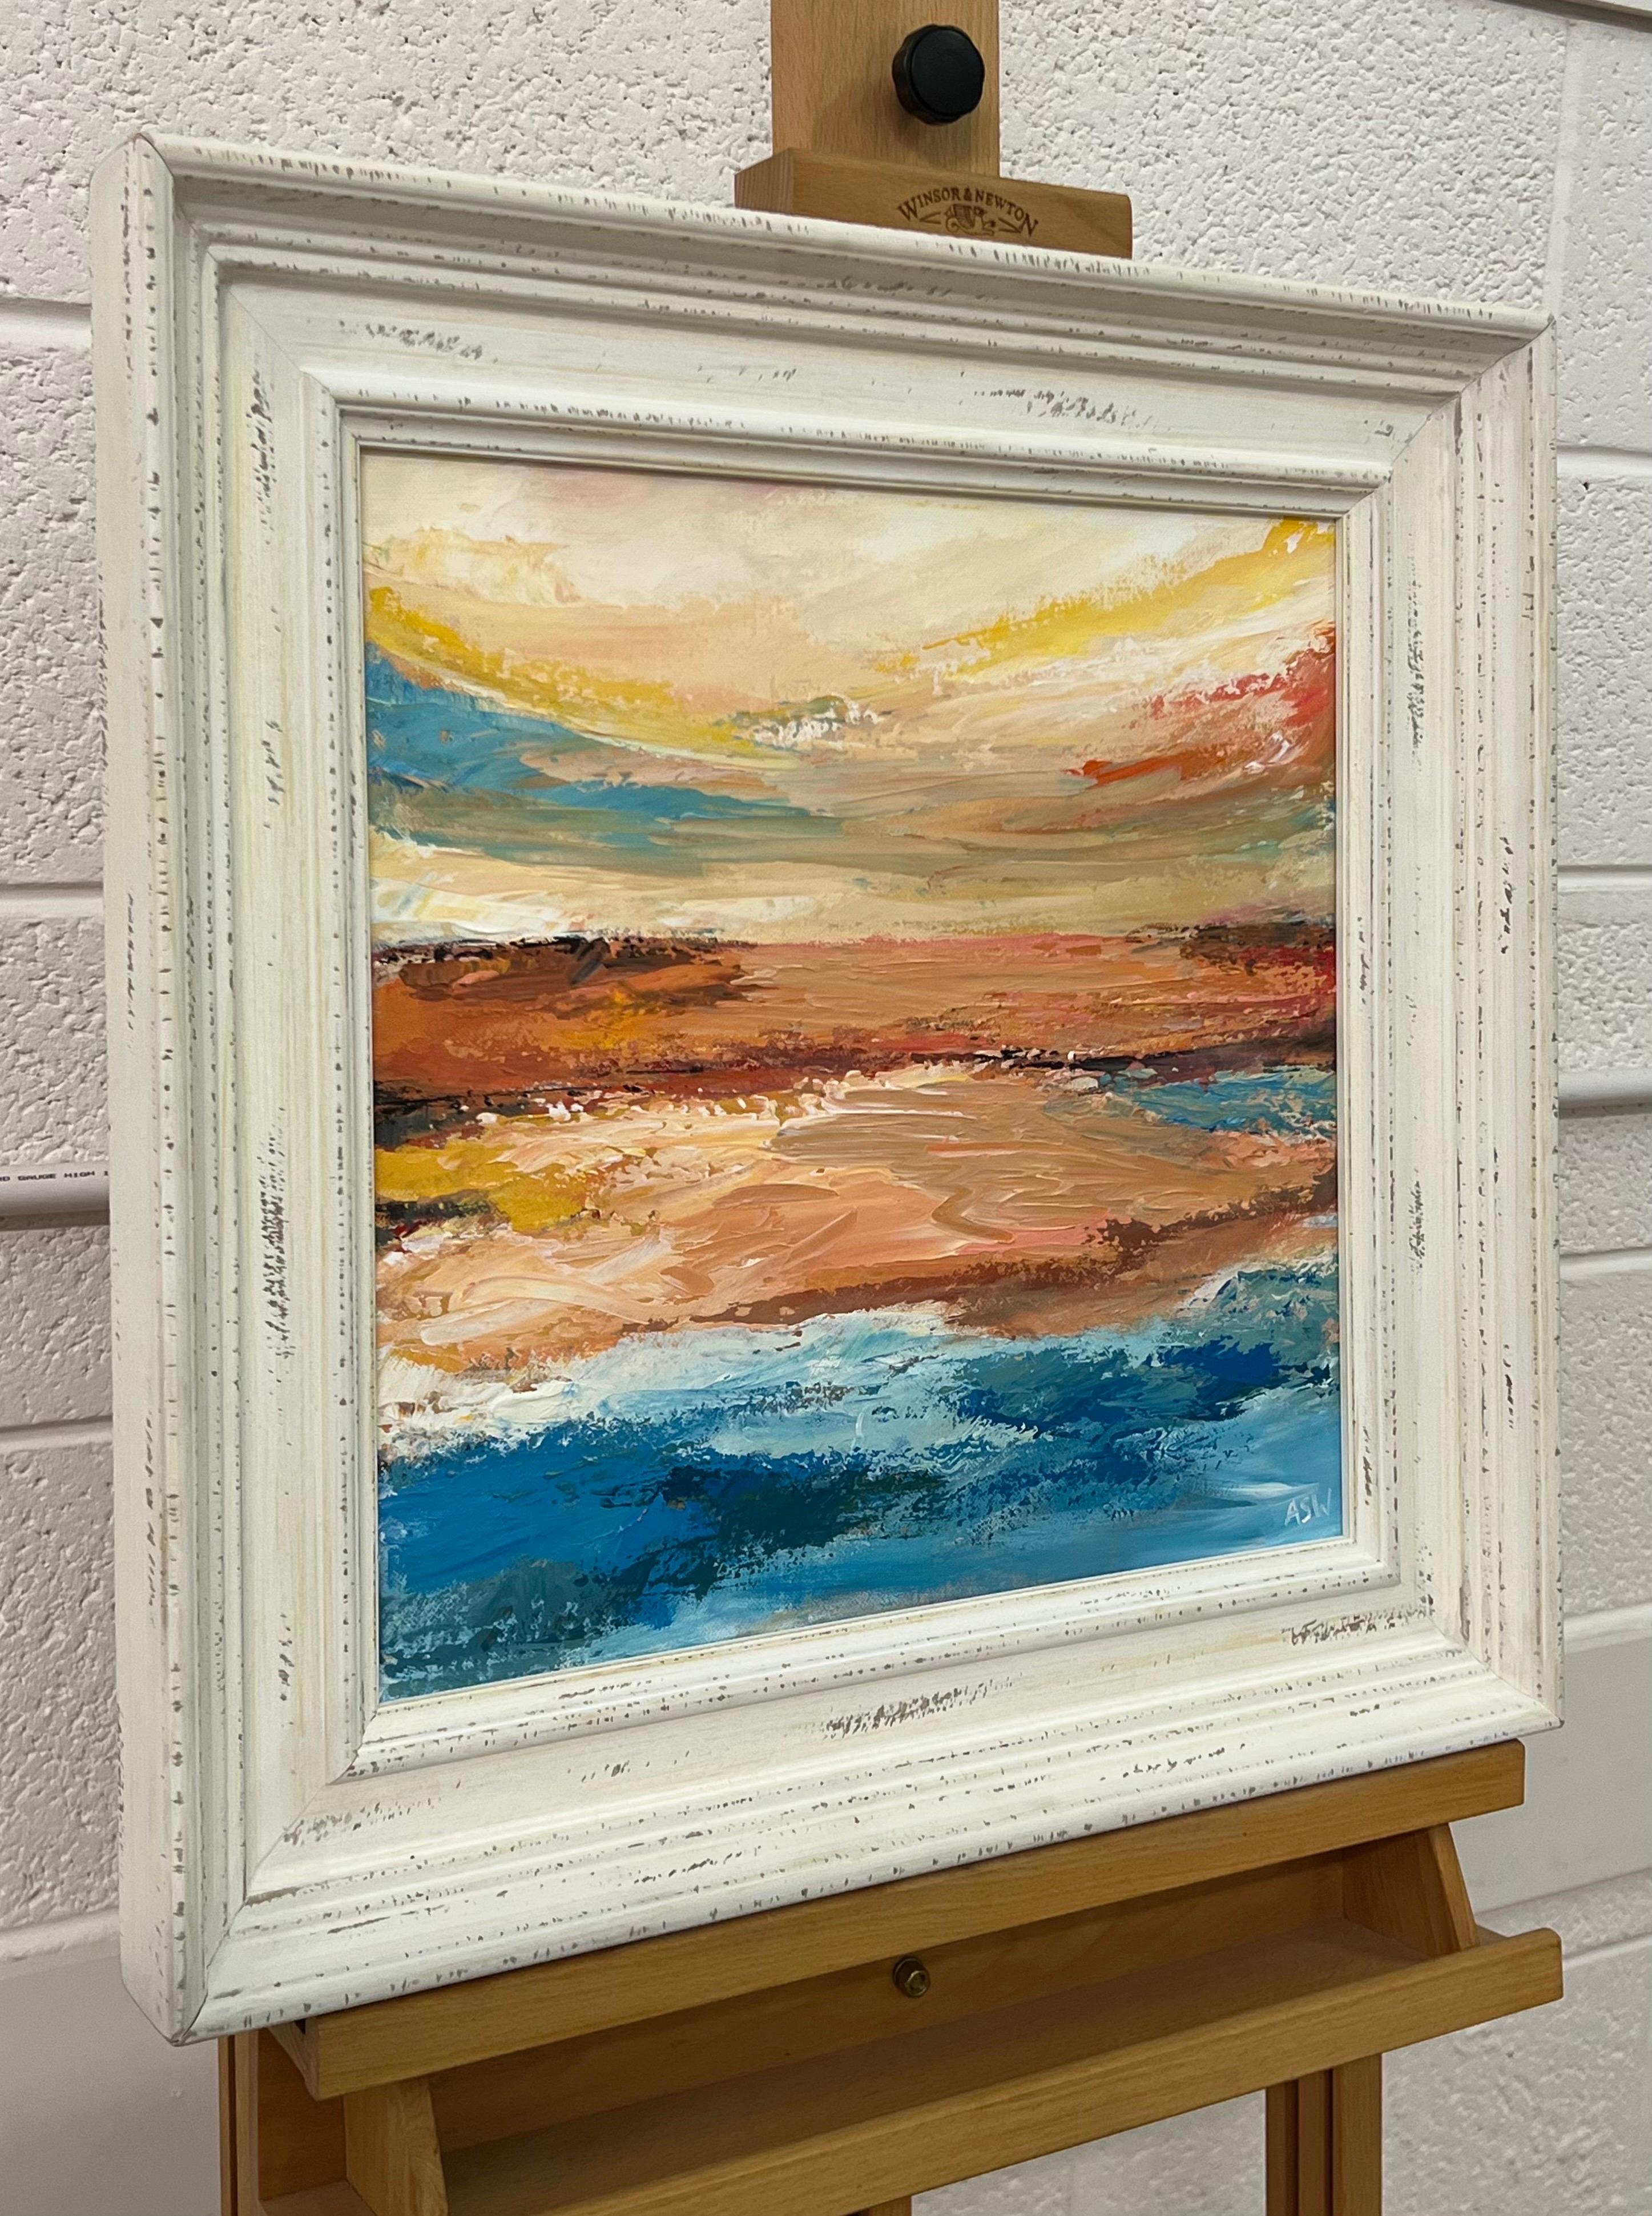 Colourful Expressive Abstract Seascape Landscape Painting with Dramatic Sky by Contemporary British Artist, Angela Wakefield. 
An impasto painting using palette knife and brush, using earthy pastel colours. 

Art measures 16 x 16 inches
Frame